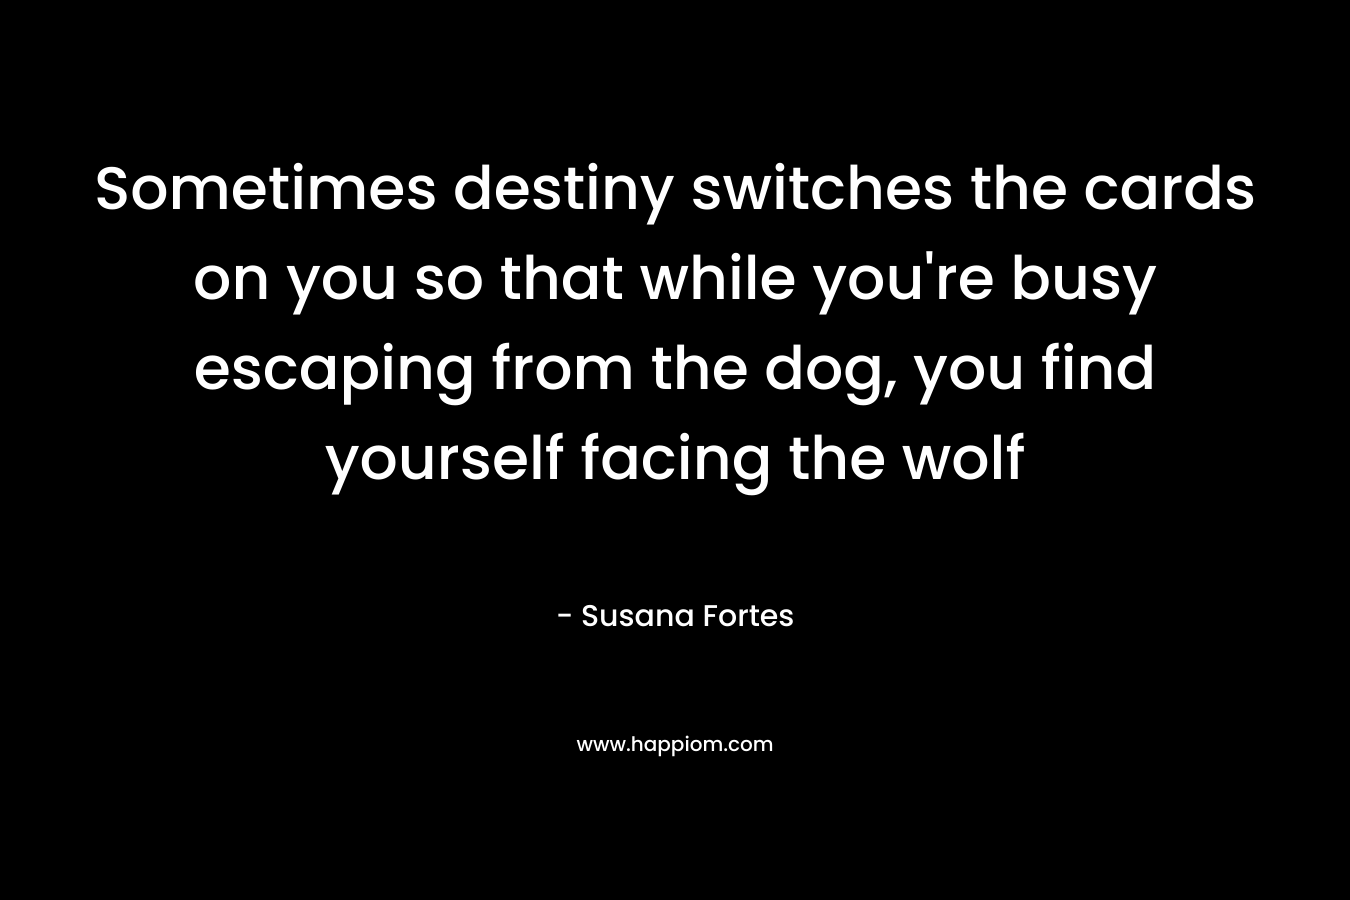 Sometimes destiny switches the cards on you so that while you’re busy escaping from the dog, you find yourself facing the wolf – Susana Fortes